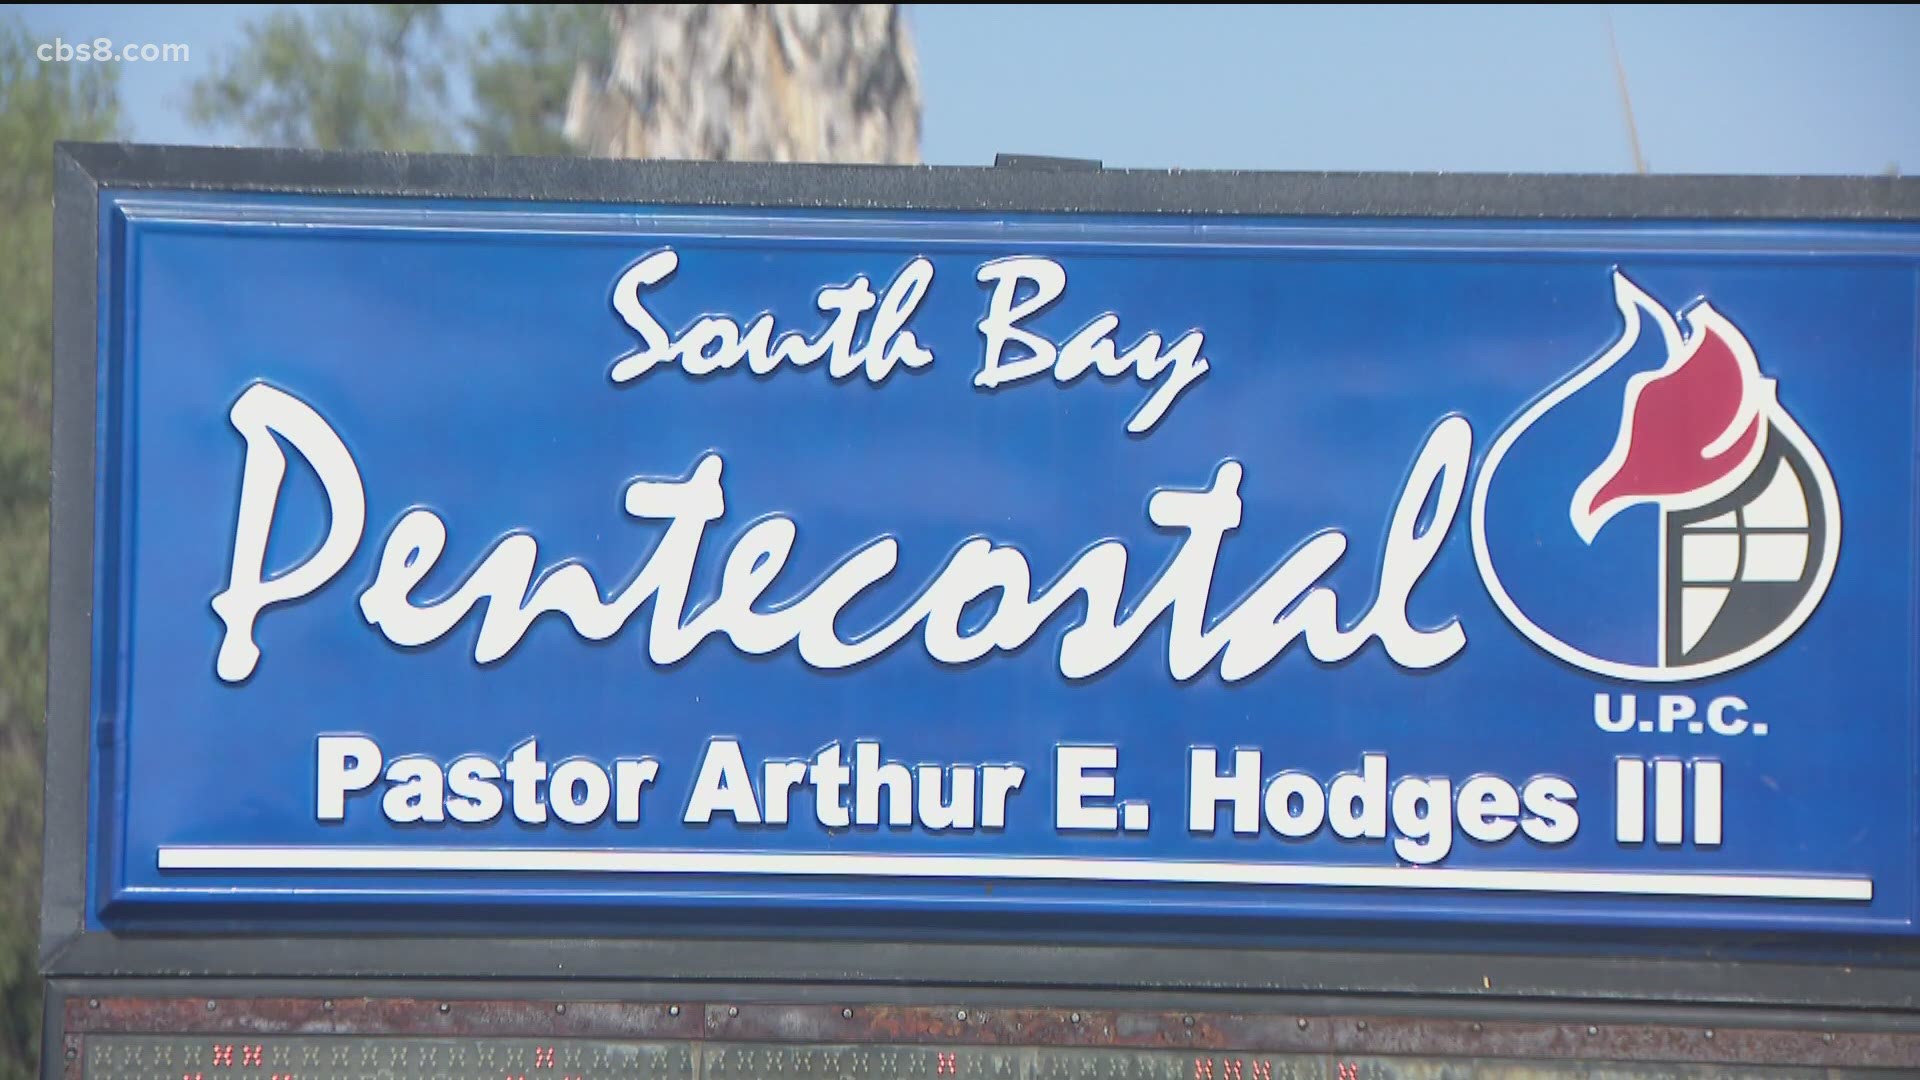 The Supreme Court has ruled in favor of South Bay Pentecostal, paving the way for houses of worship to hold indoor gatherings again.